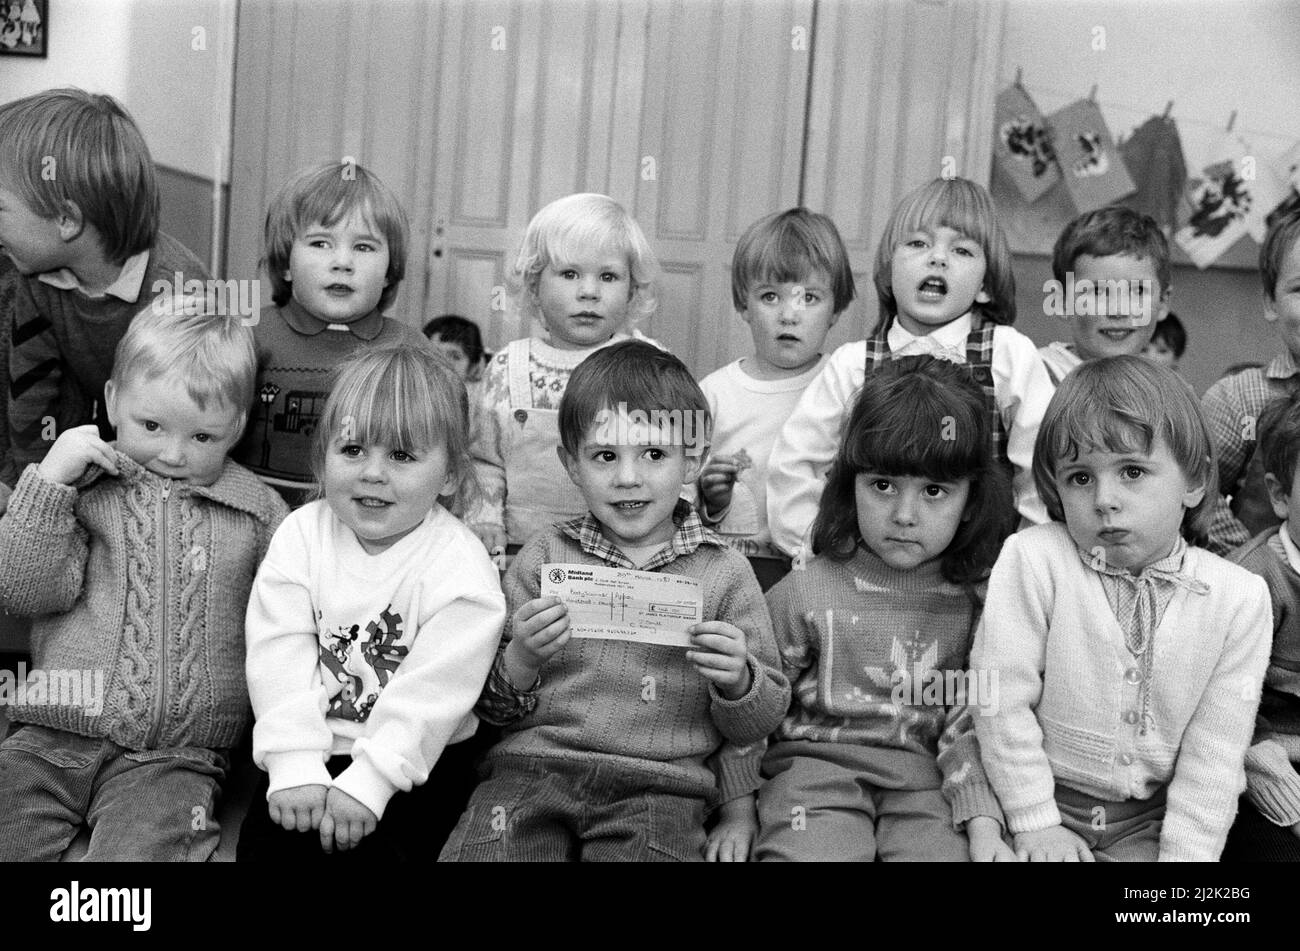 St James's Playgroup at Marsh raised £145 for the £1/2m Examiner Bodyscanner Appeal with a coffee morning, bring and buy sale and cake and toy stalls. Young Jonathan Morris and fellow members are pictured with the cheque. The event was held at St James's Parish Hall, Marsh. 1st April 1987. Stock Photo